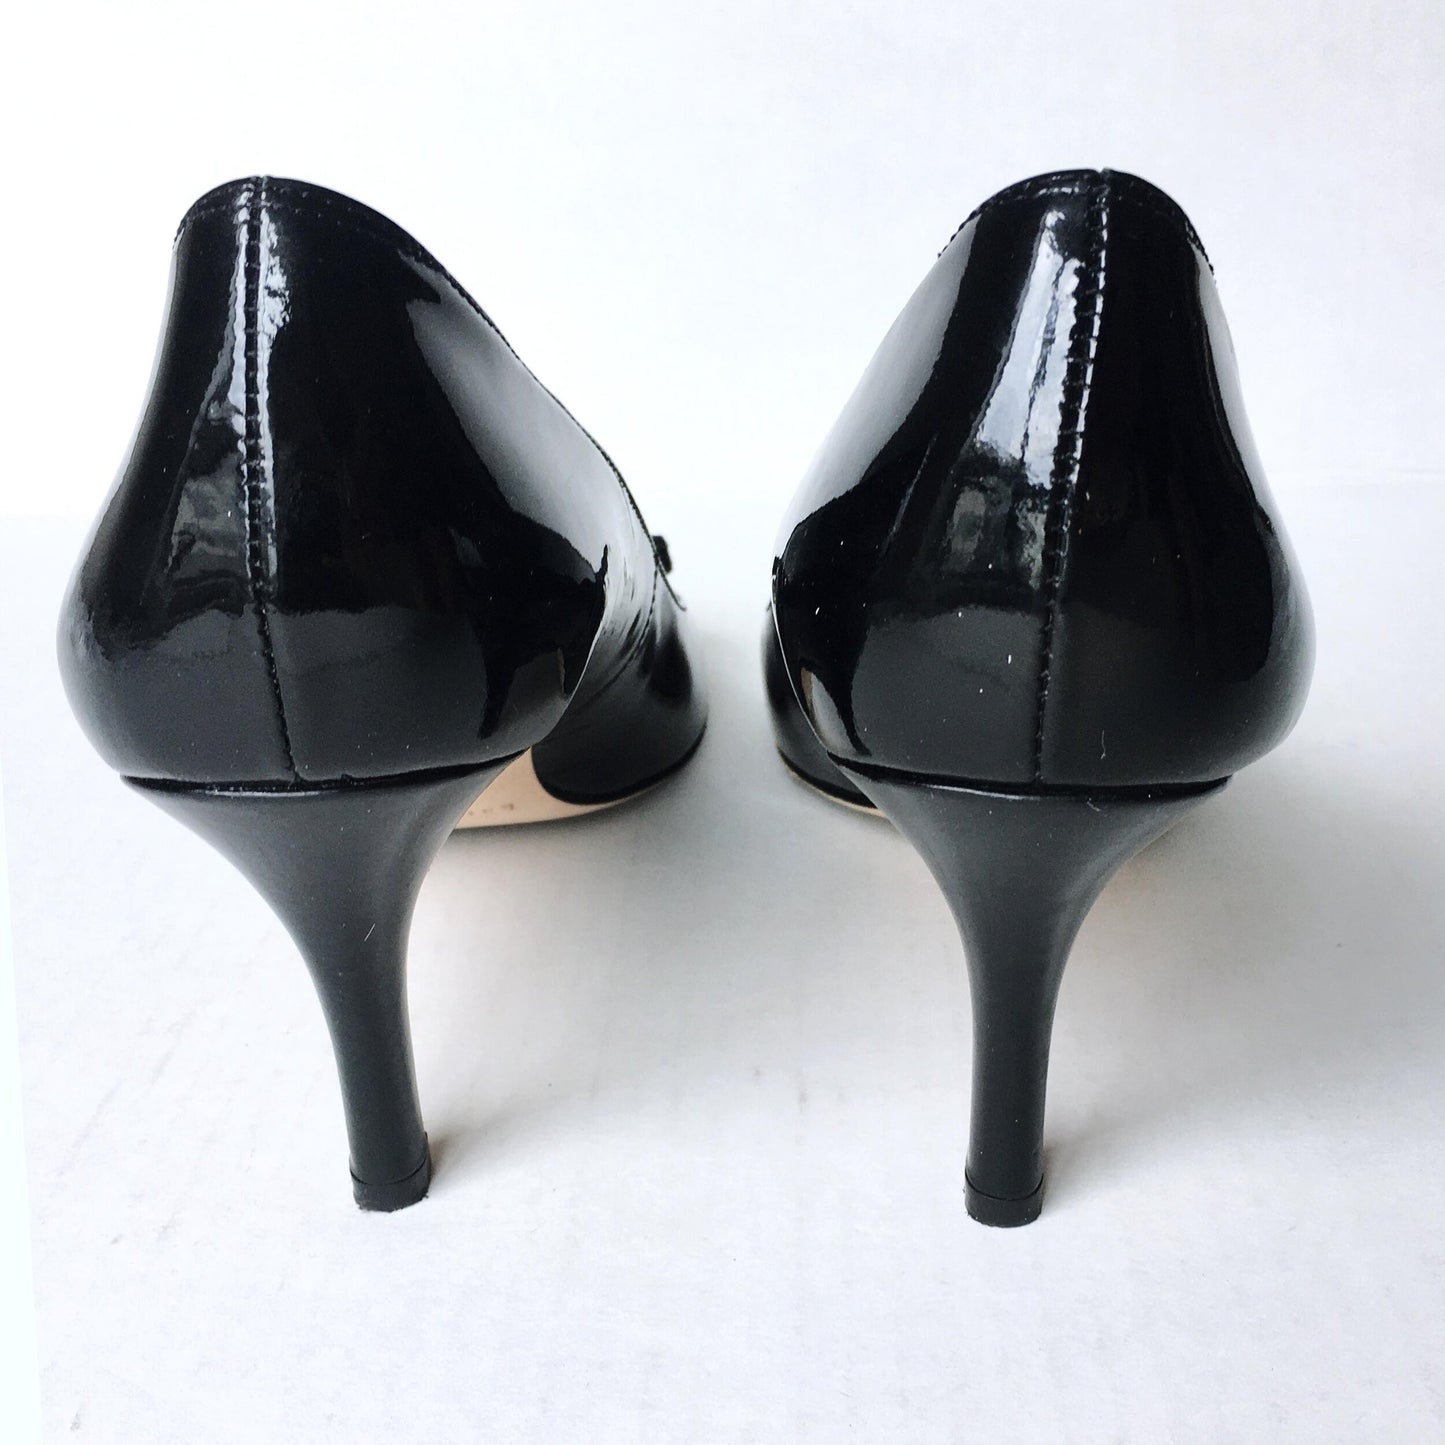 Kate Spade patent bow heels - size 9